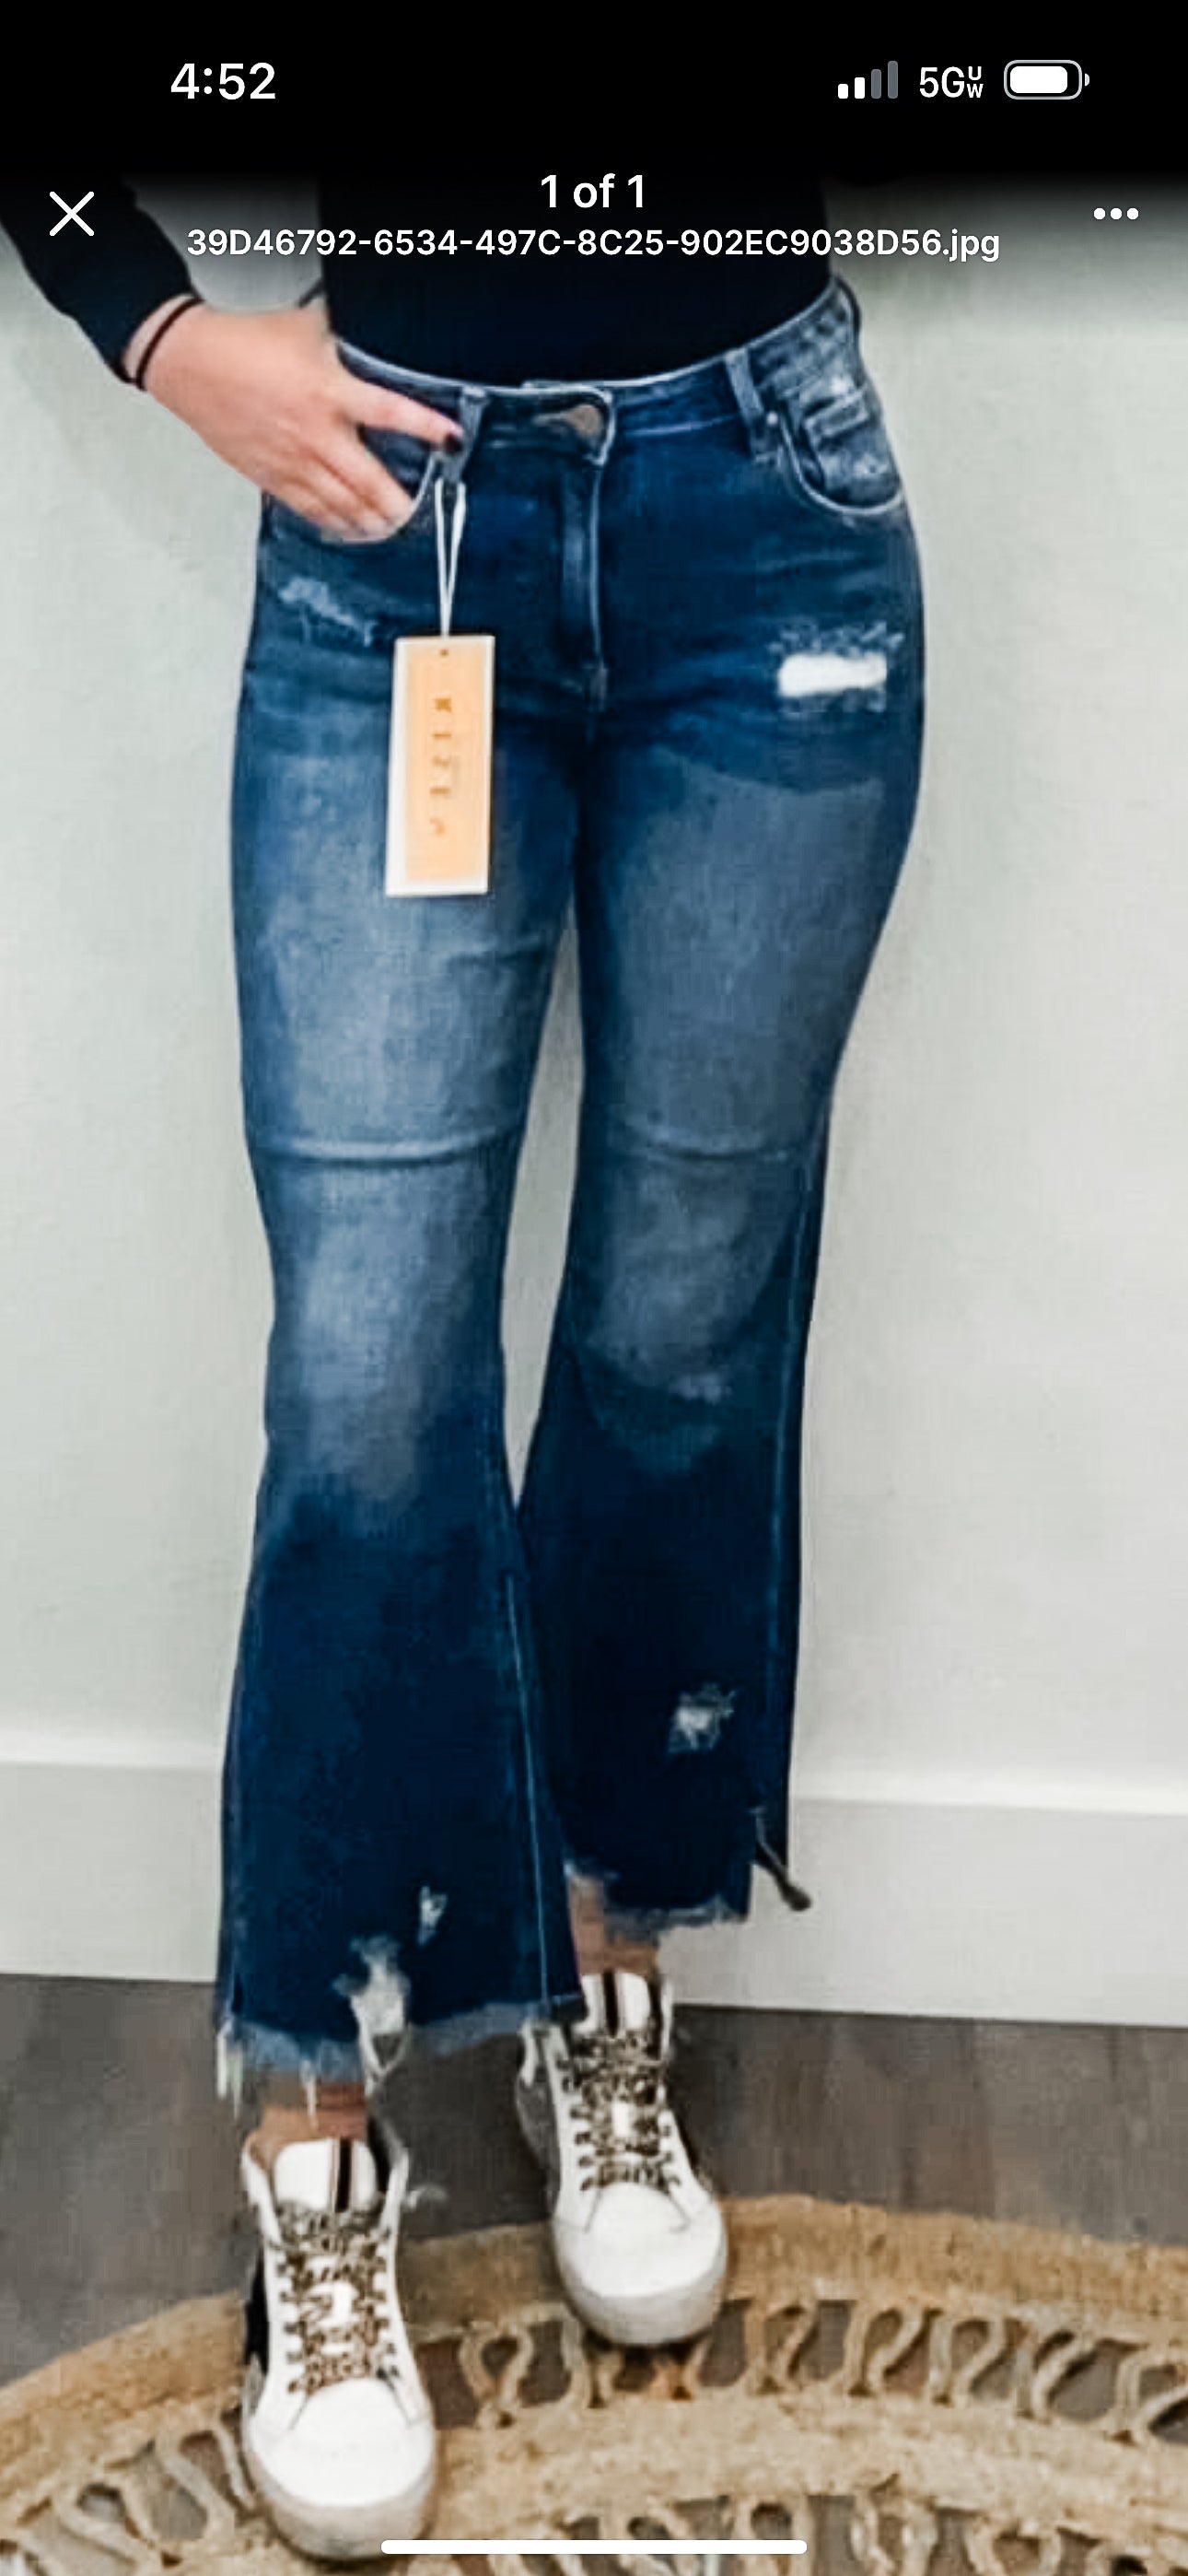 High Rise Ankle Flare Jeans